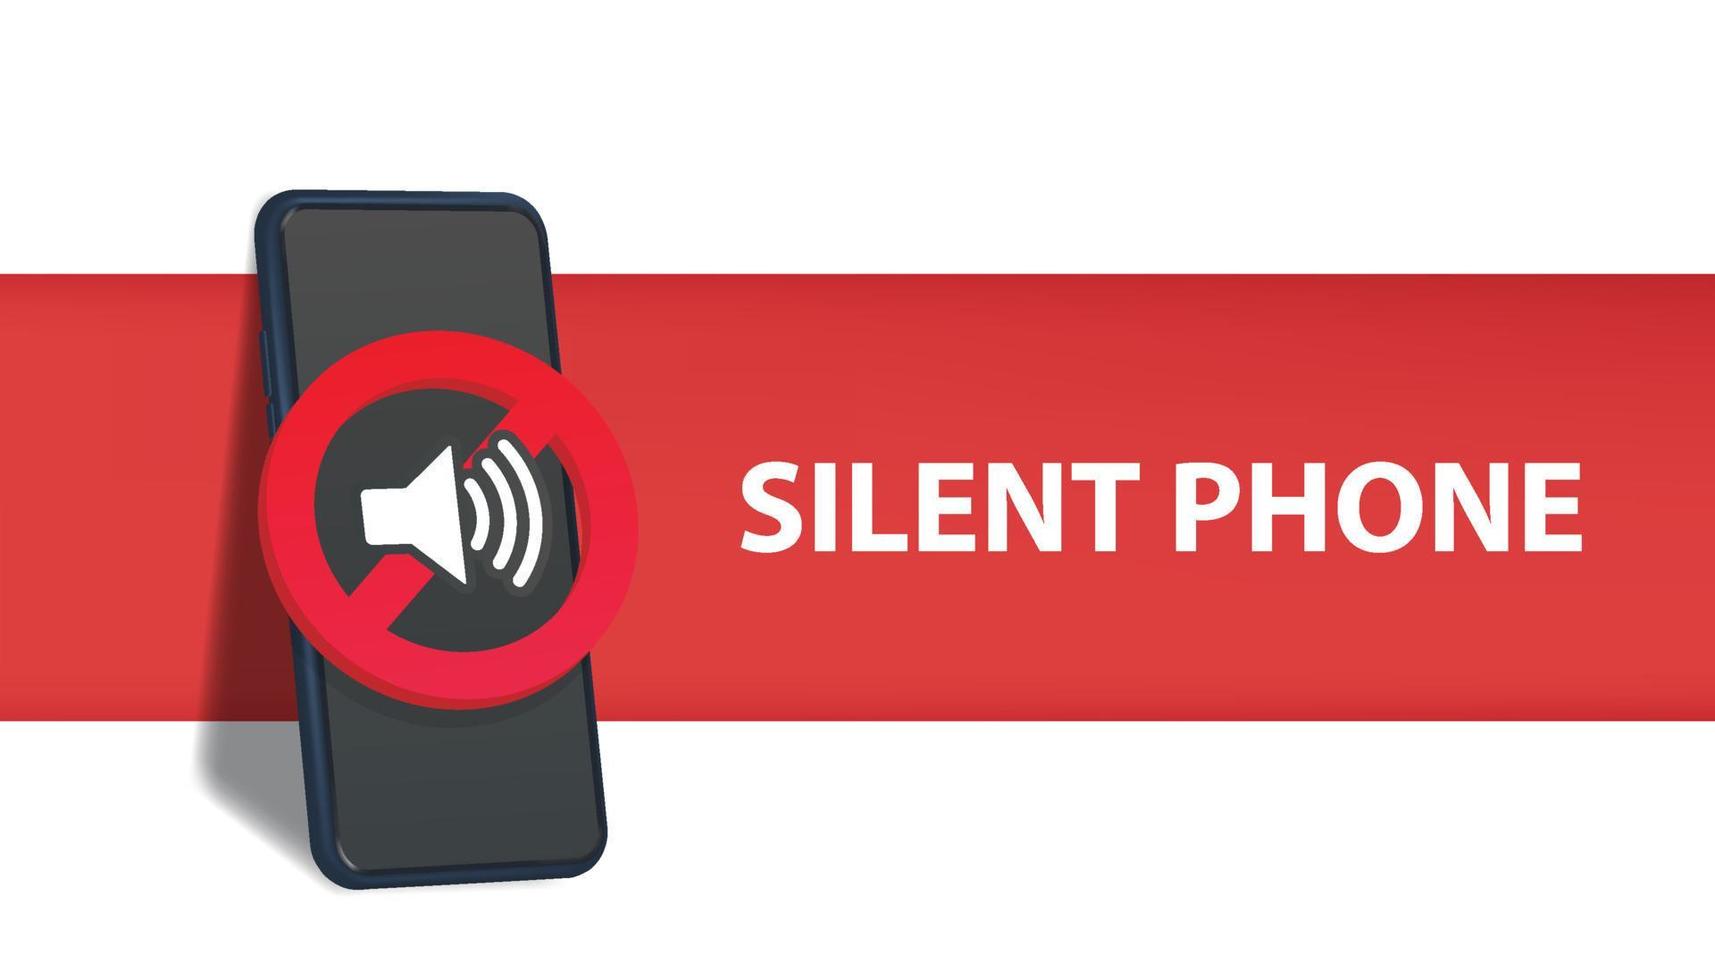 No sound phone or Silent phone vector